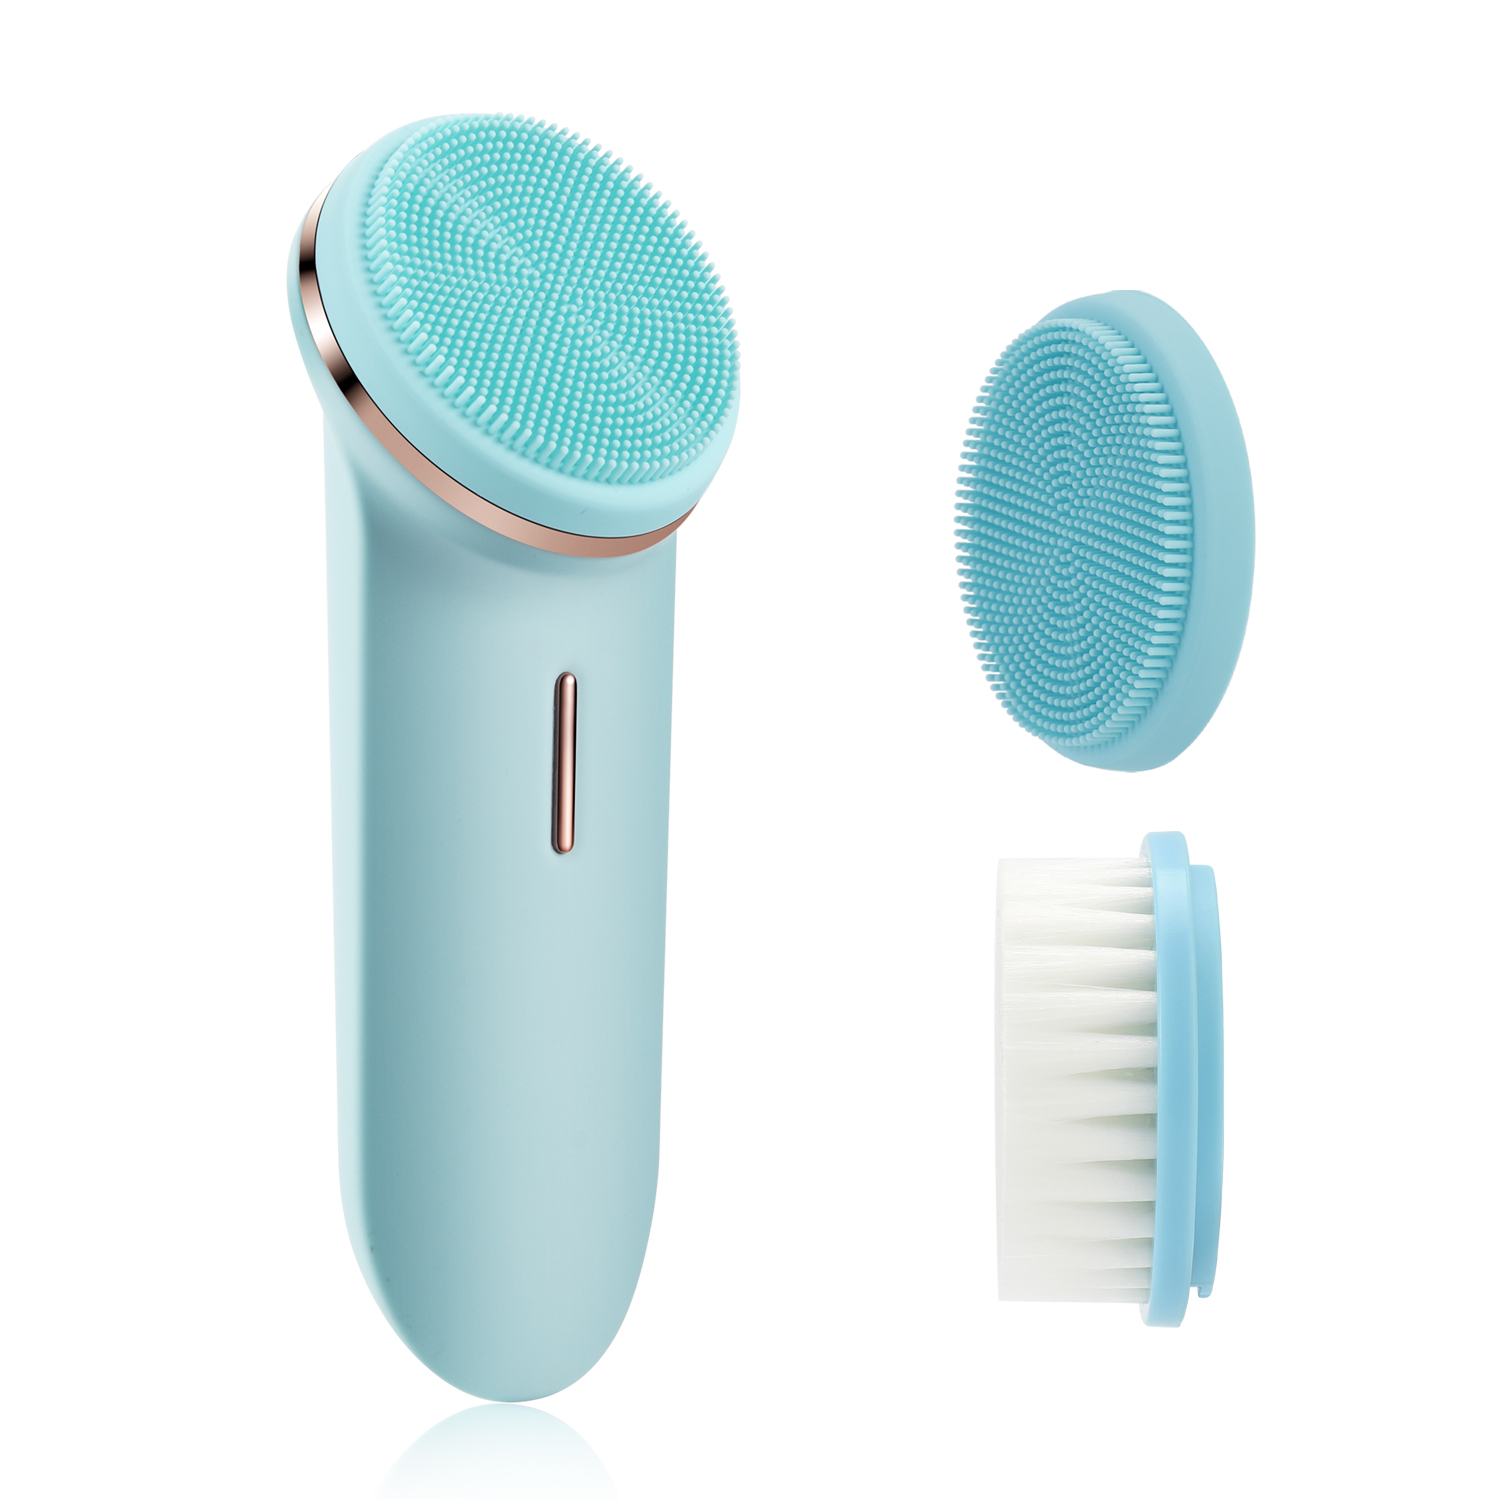 2 in 1 sonic facial cleansing brush